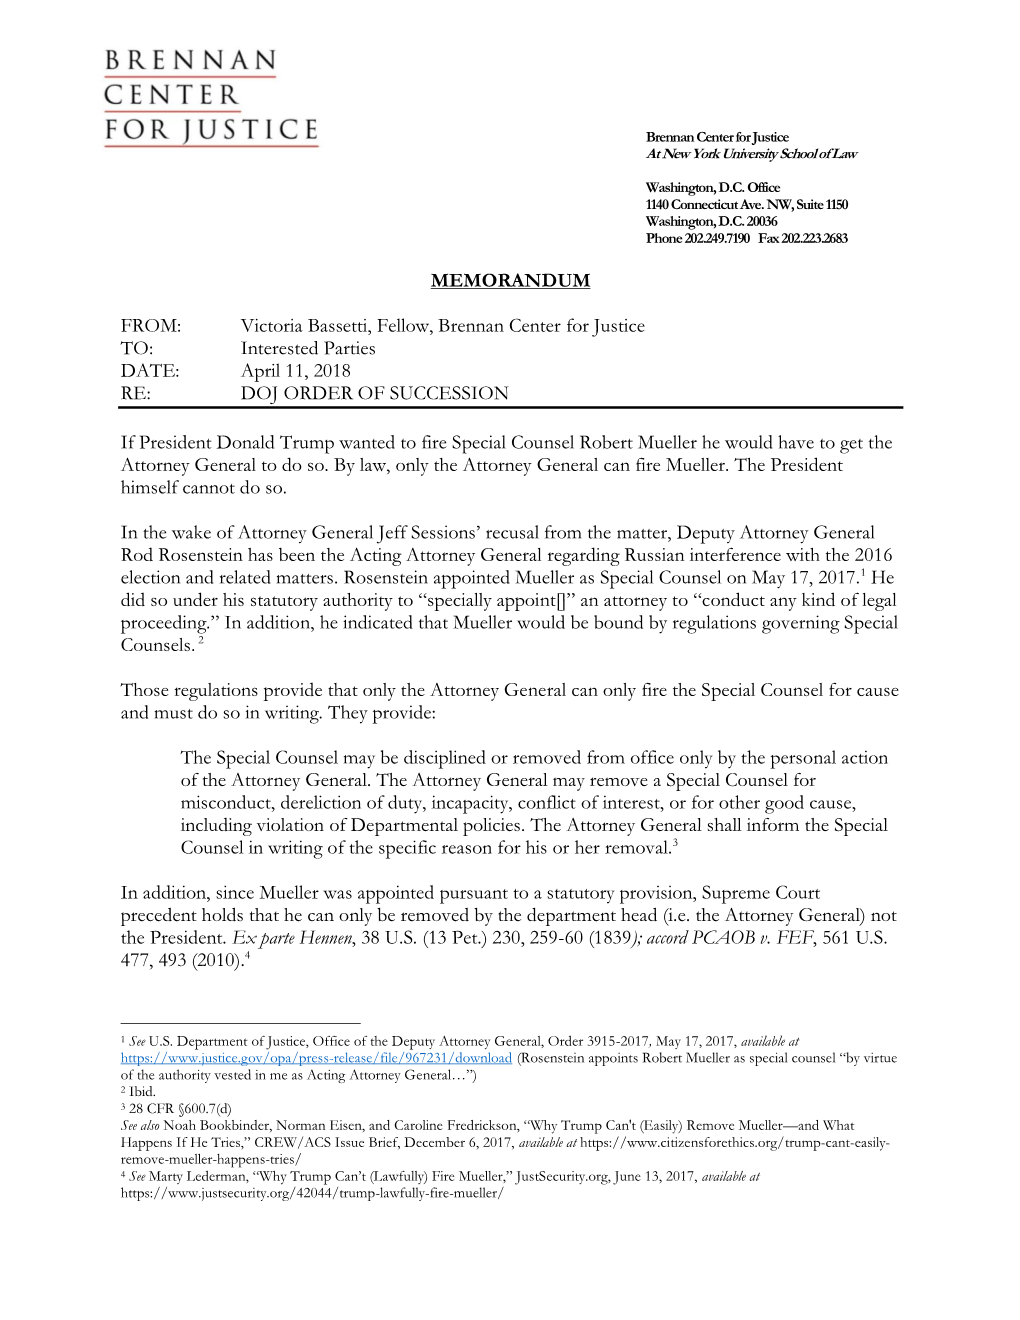 MEMORANDUM FROM: Victoria Bassetti, Fellow, Brennan Center for Justice TO: Interested Parties DATE: April 11, 2018 RE